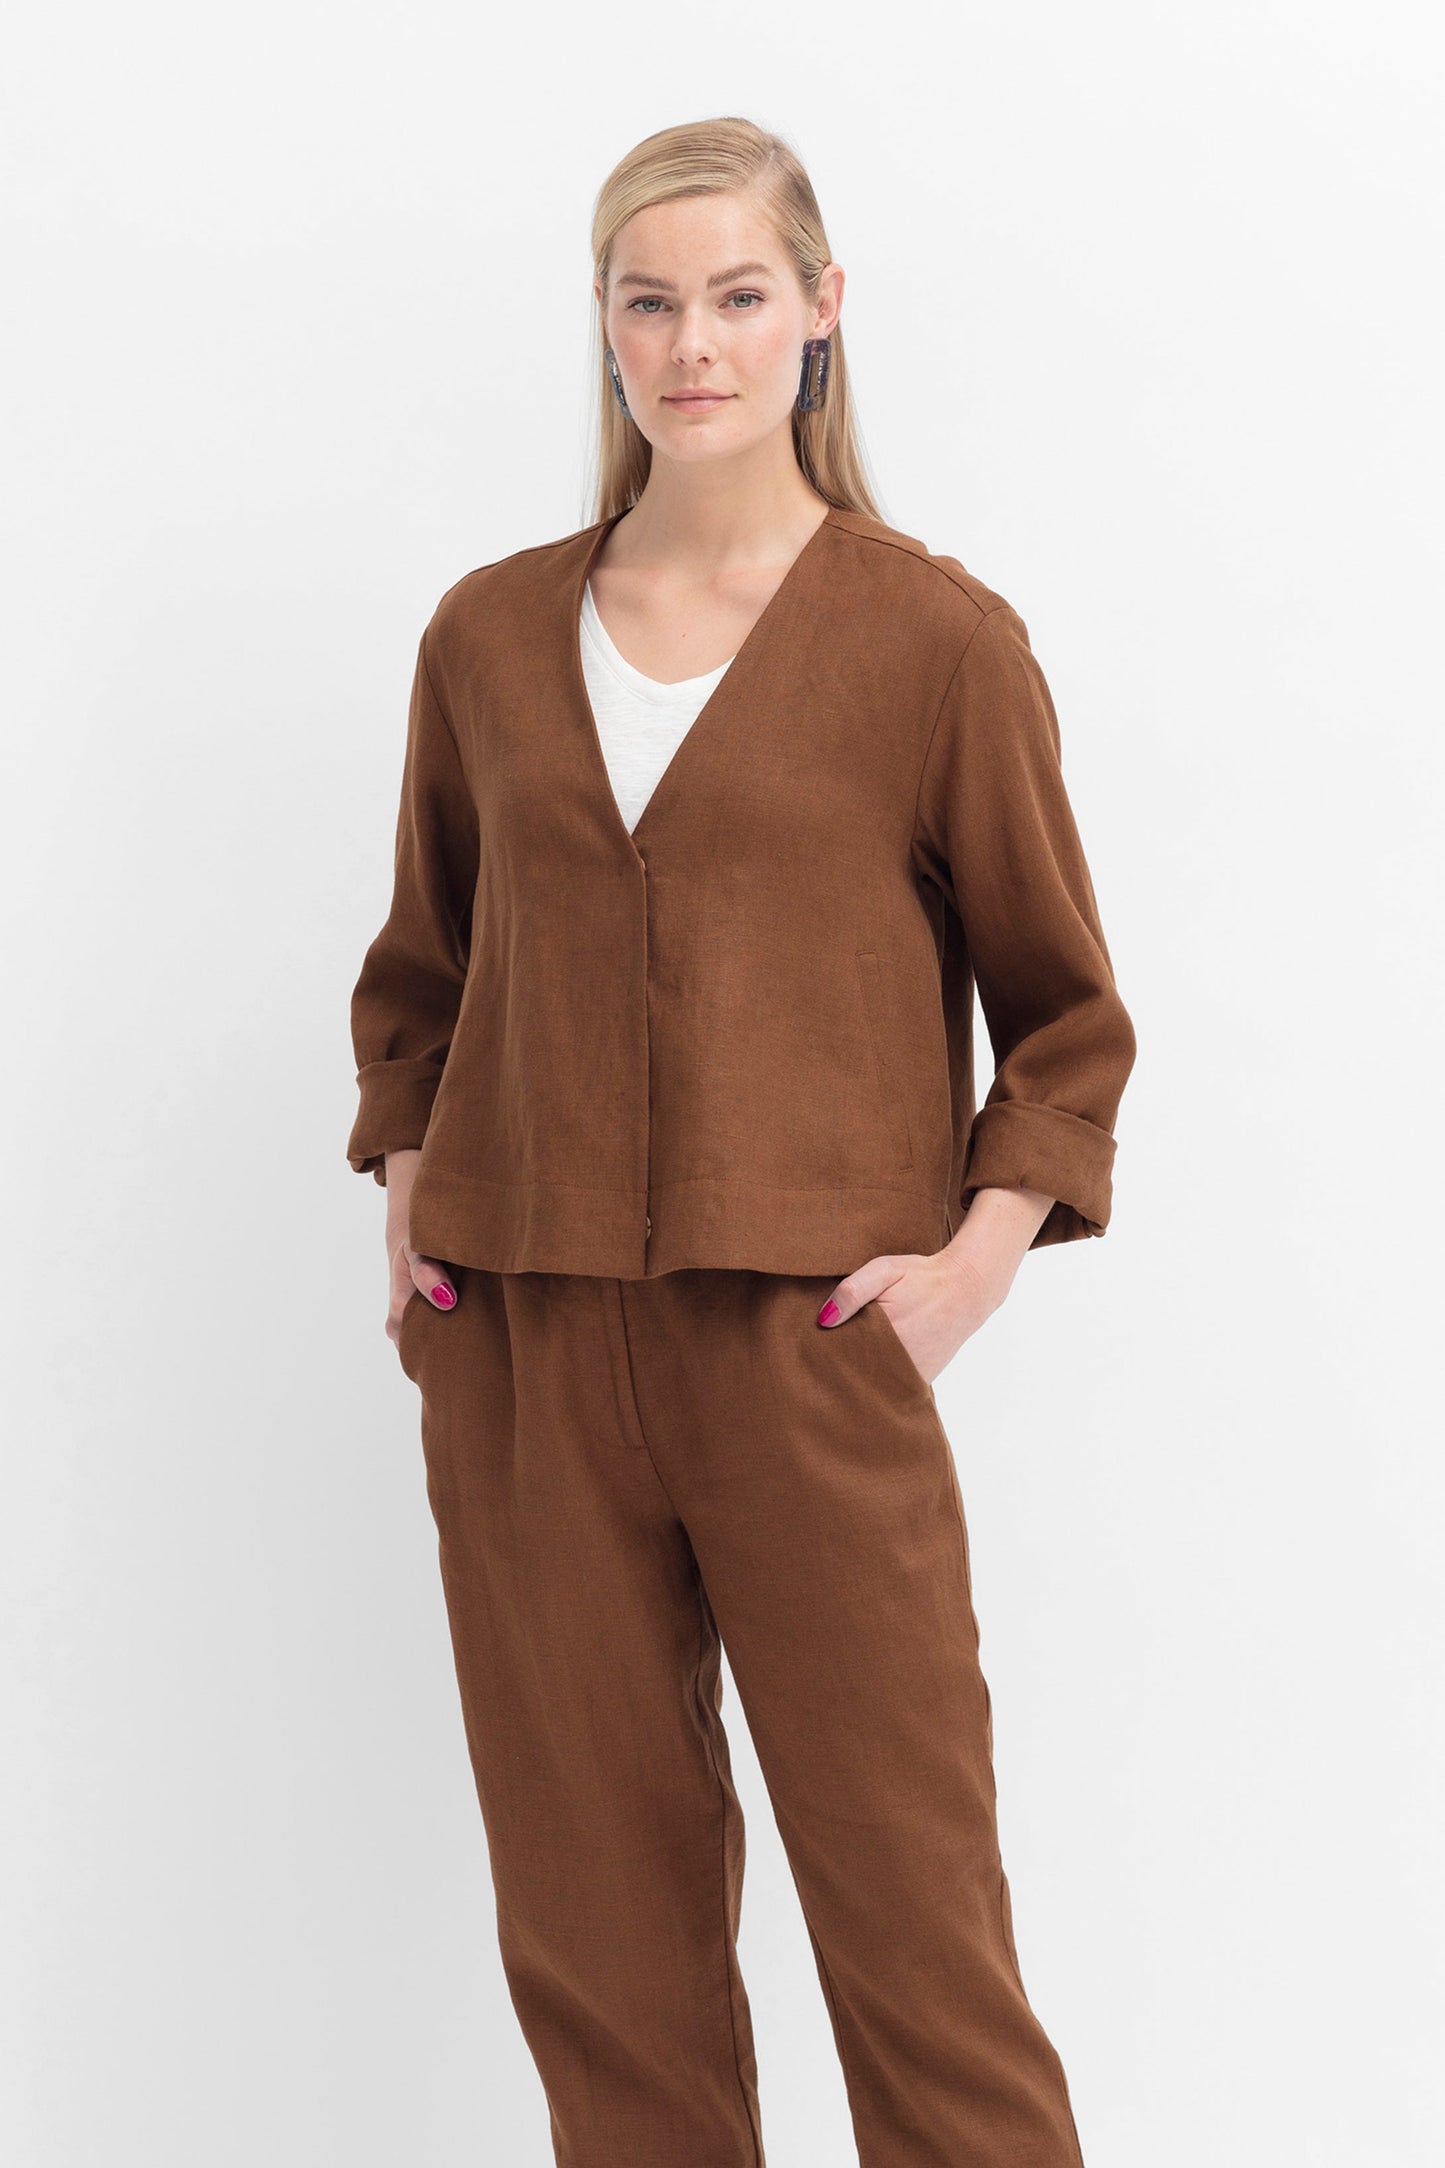 Fiene French Linen Light Weight Jacket with Pant Model Front | BRONZE BROWN